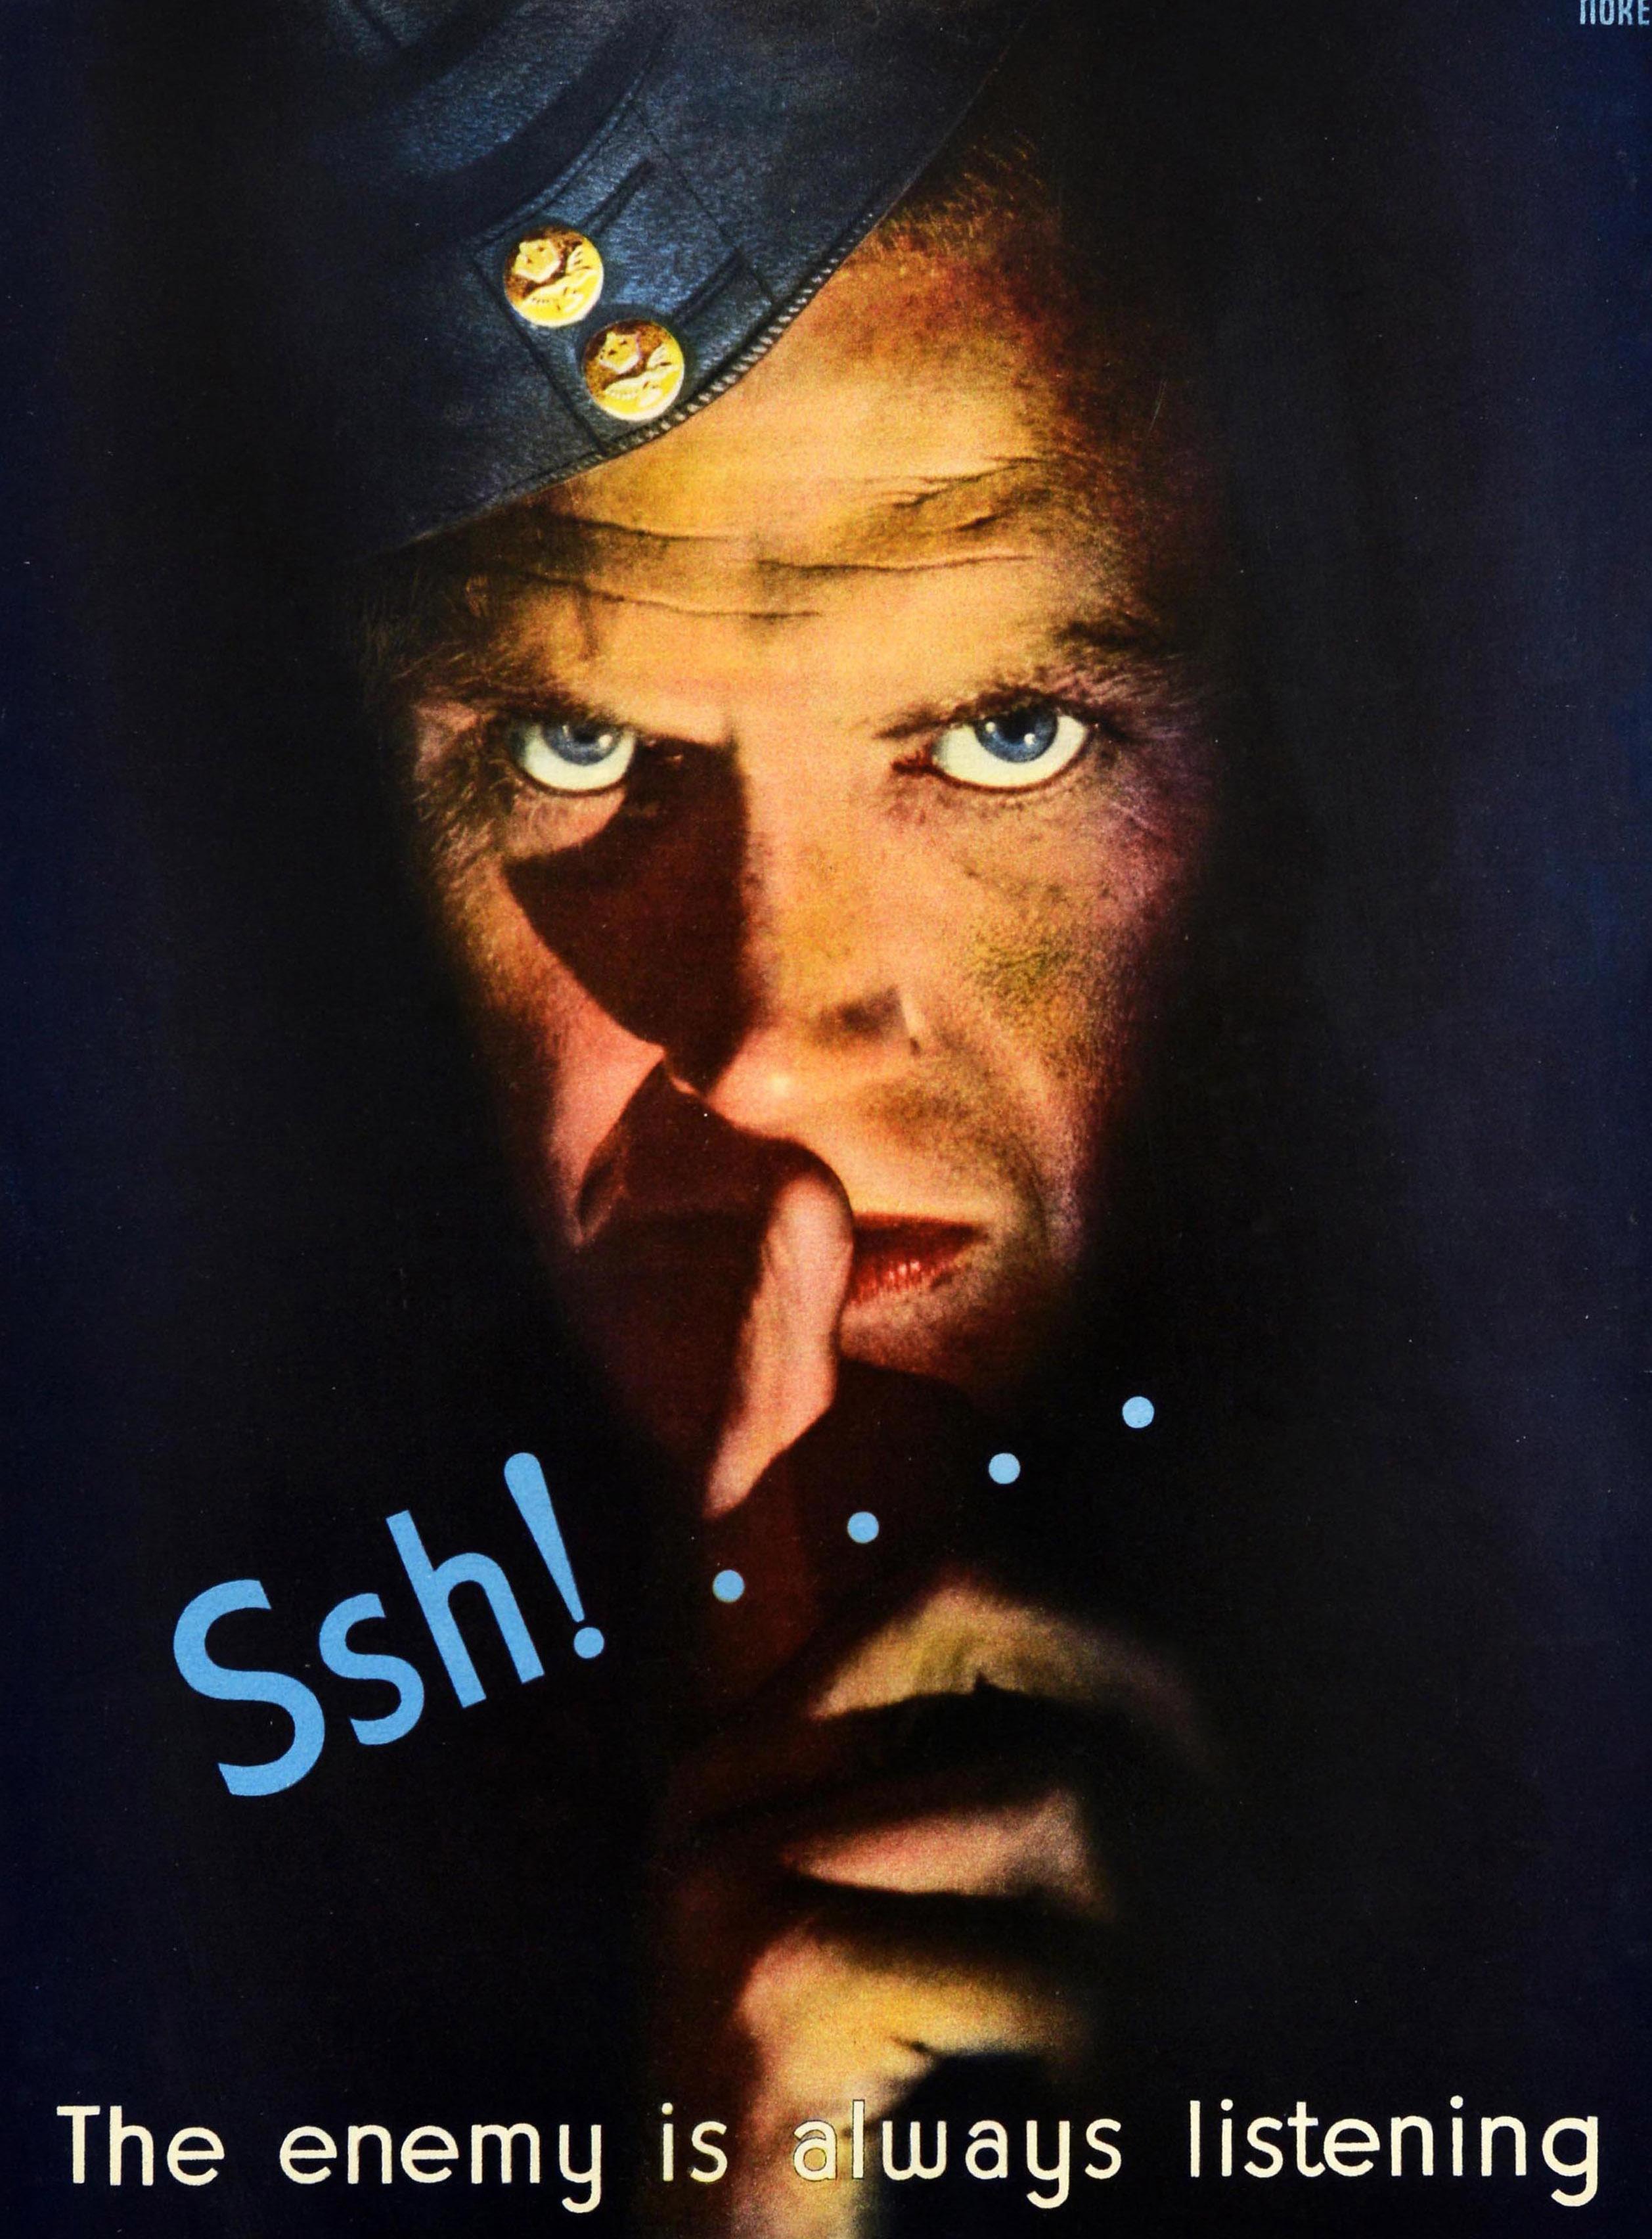 Original vintage World War Two poster - Ssh! The Enemy Is Always Listening - featuring a dynamic image showing a man in military uniform looking at the viewer with a warning about careless talk and keeping quiet, indicating his finger against his